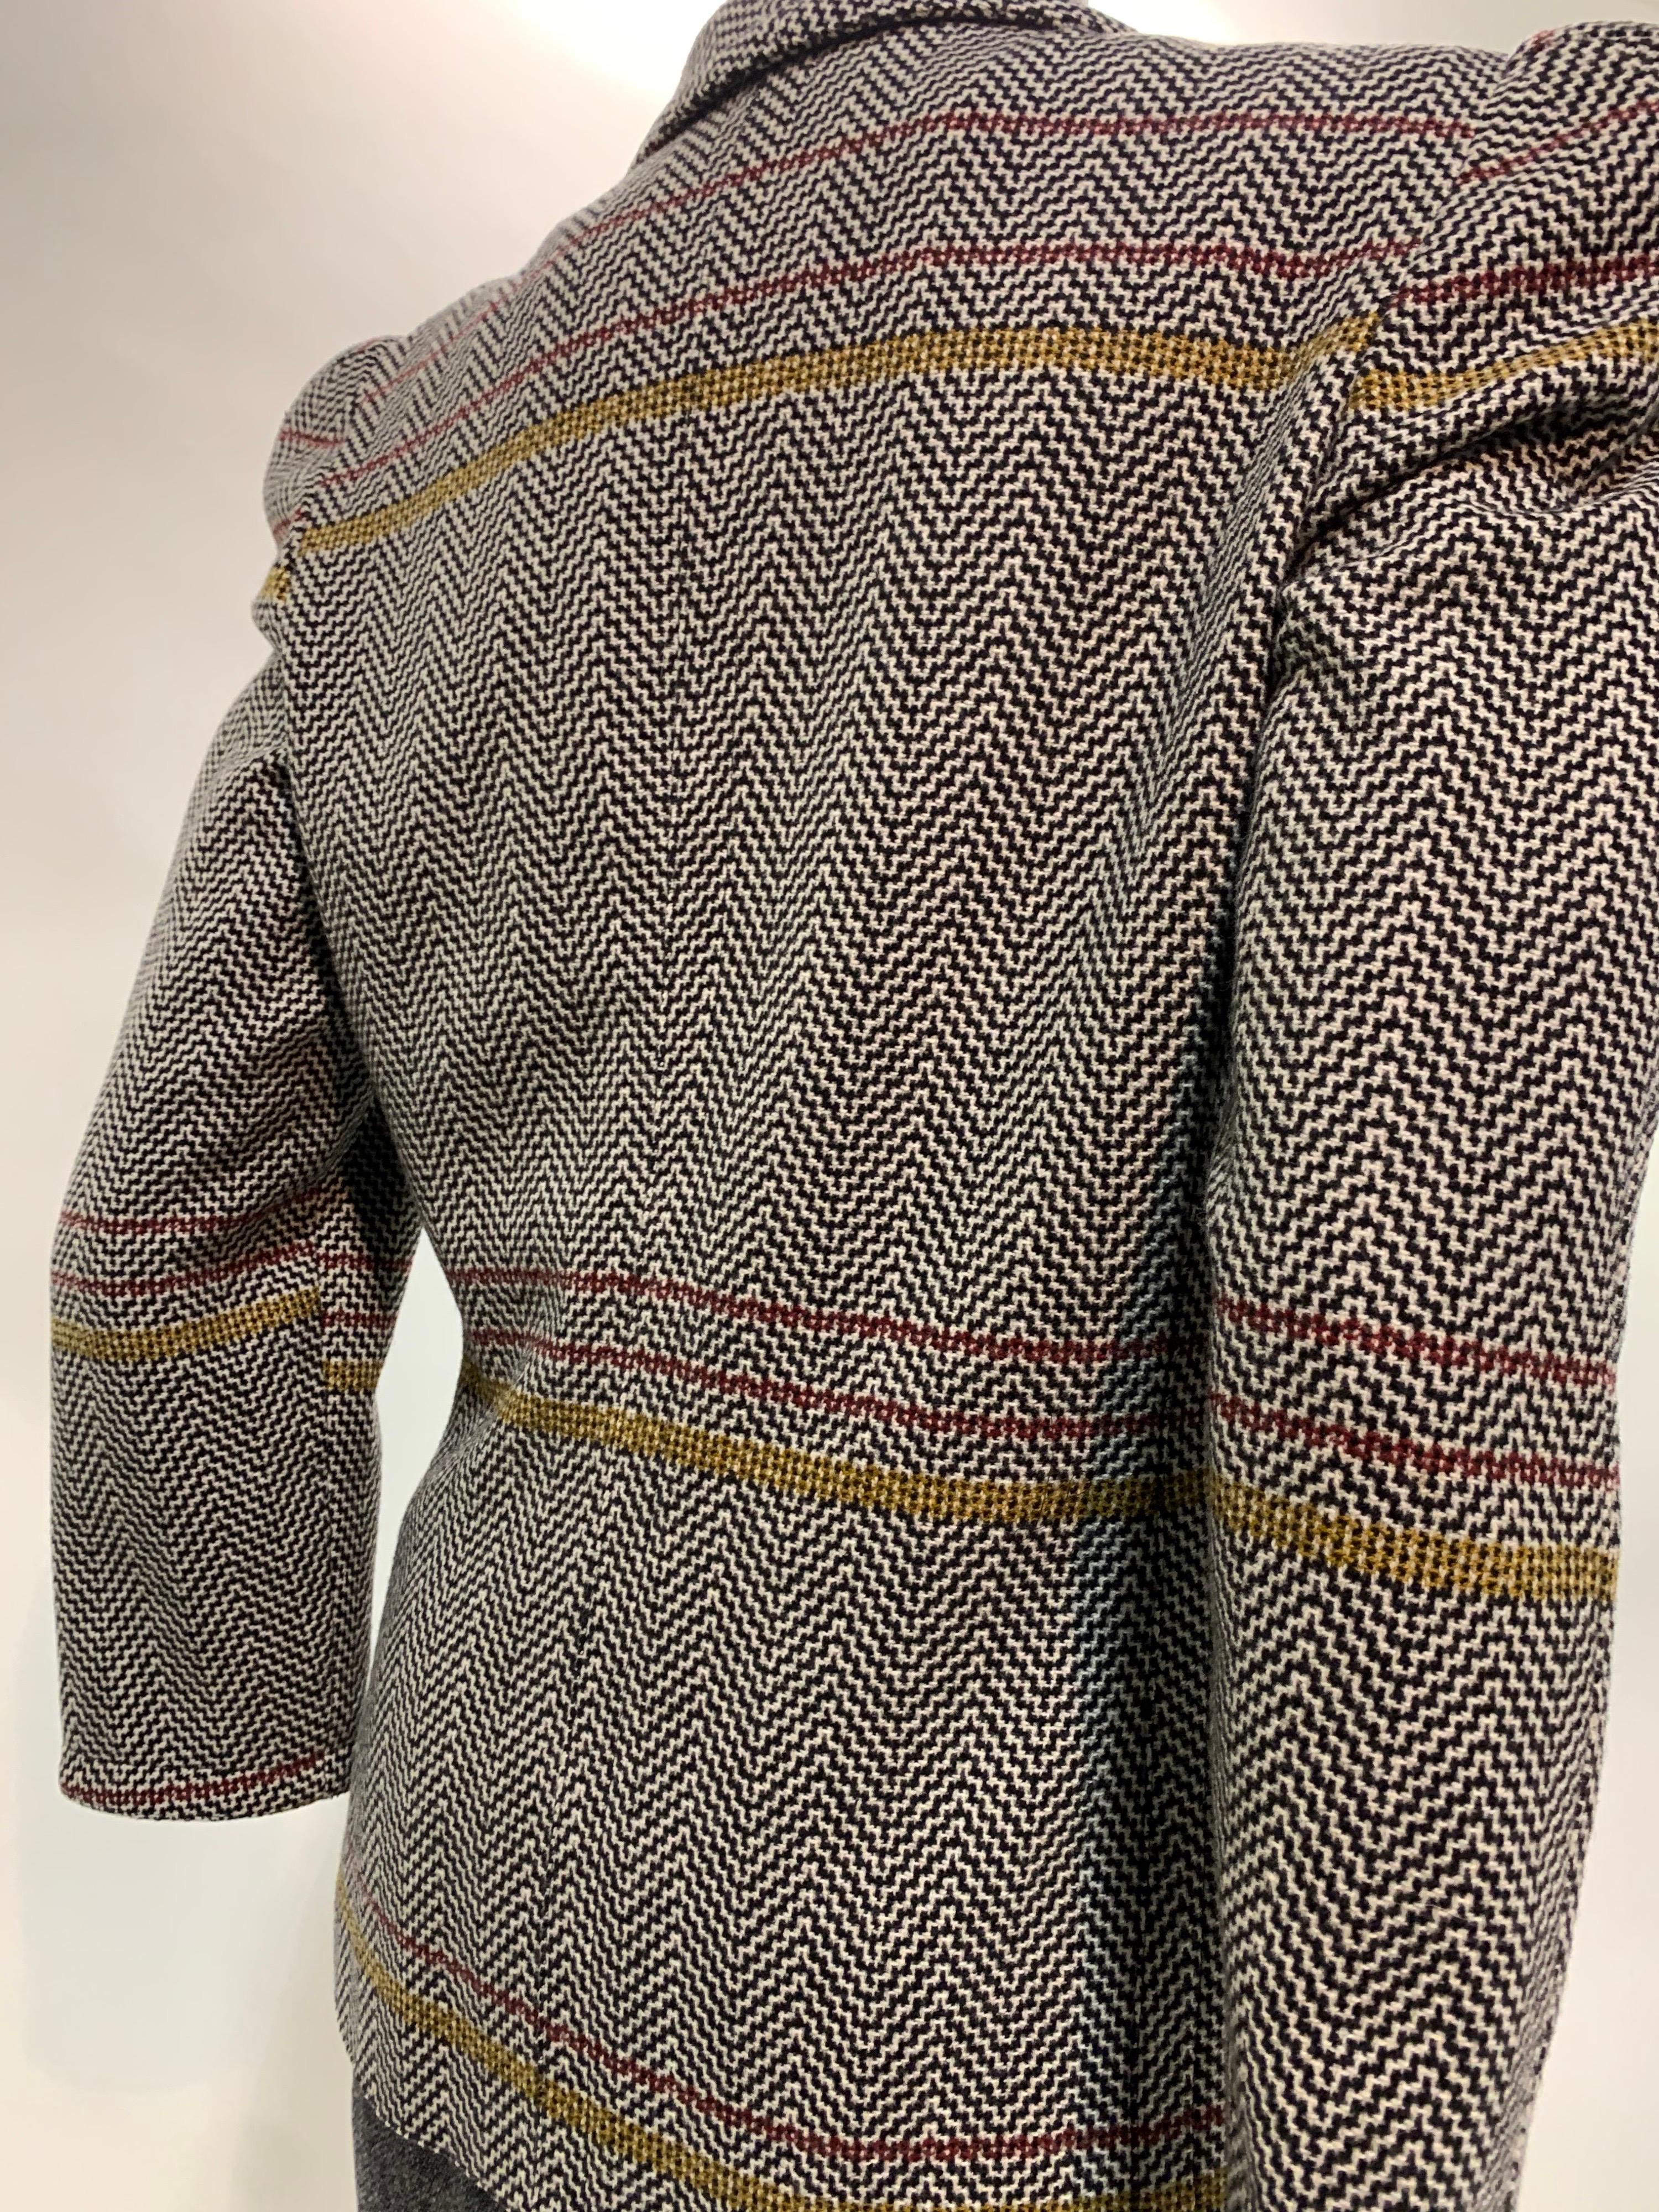 1980 Gianni Versace Mixed Tweed Skirt Suit w/ Structured Shoulder Silhouette For Sale 4